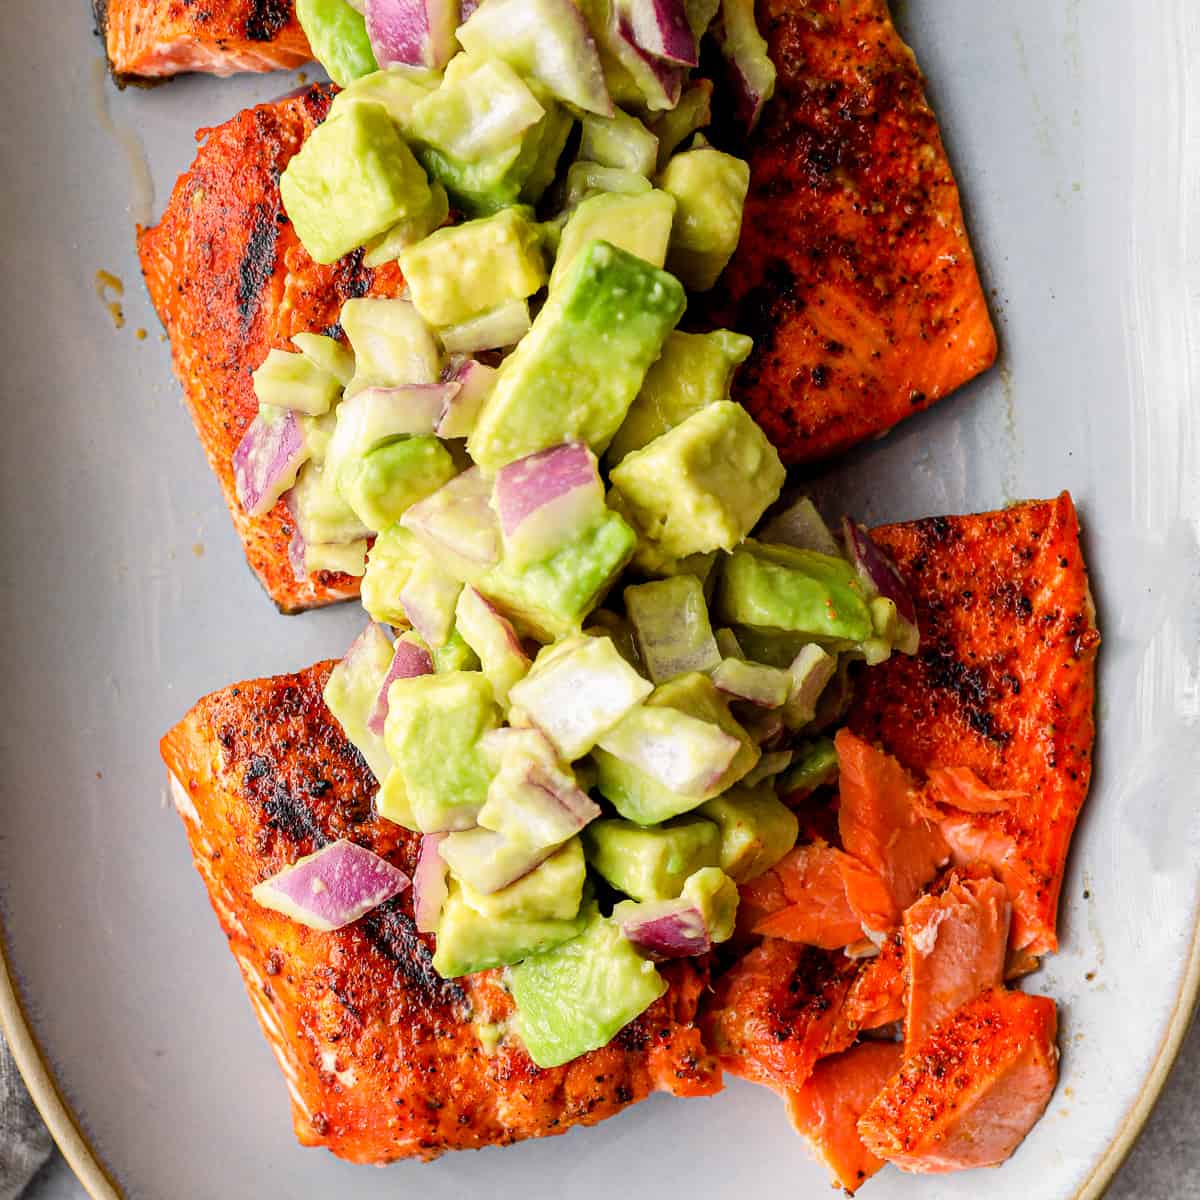 9 Easy Whole30 Recipes That Everyone Loves - Good Food For Good